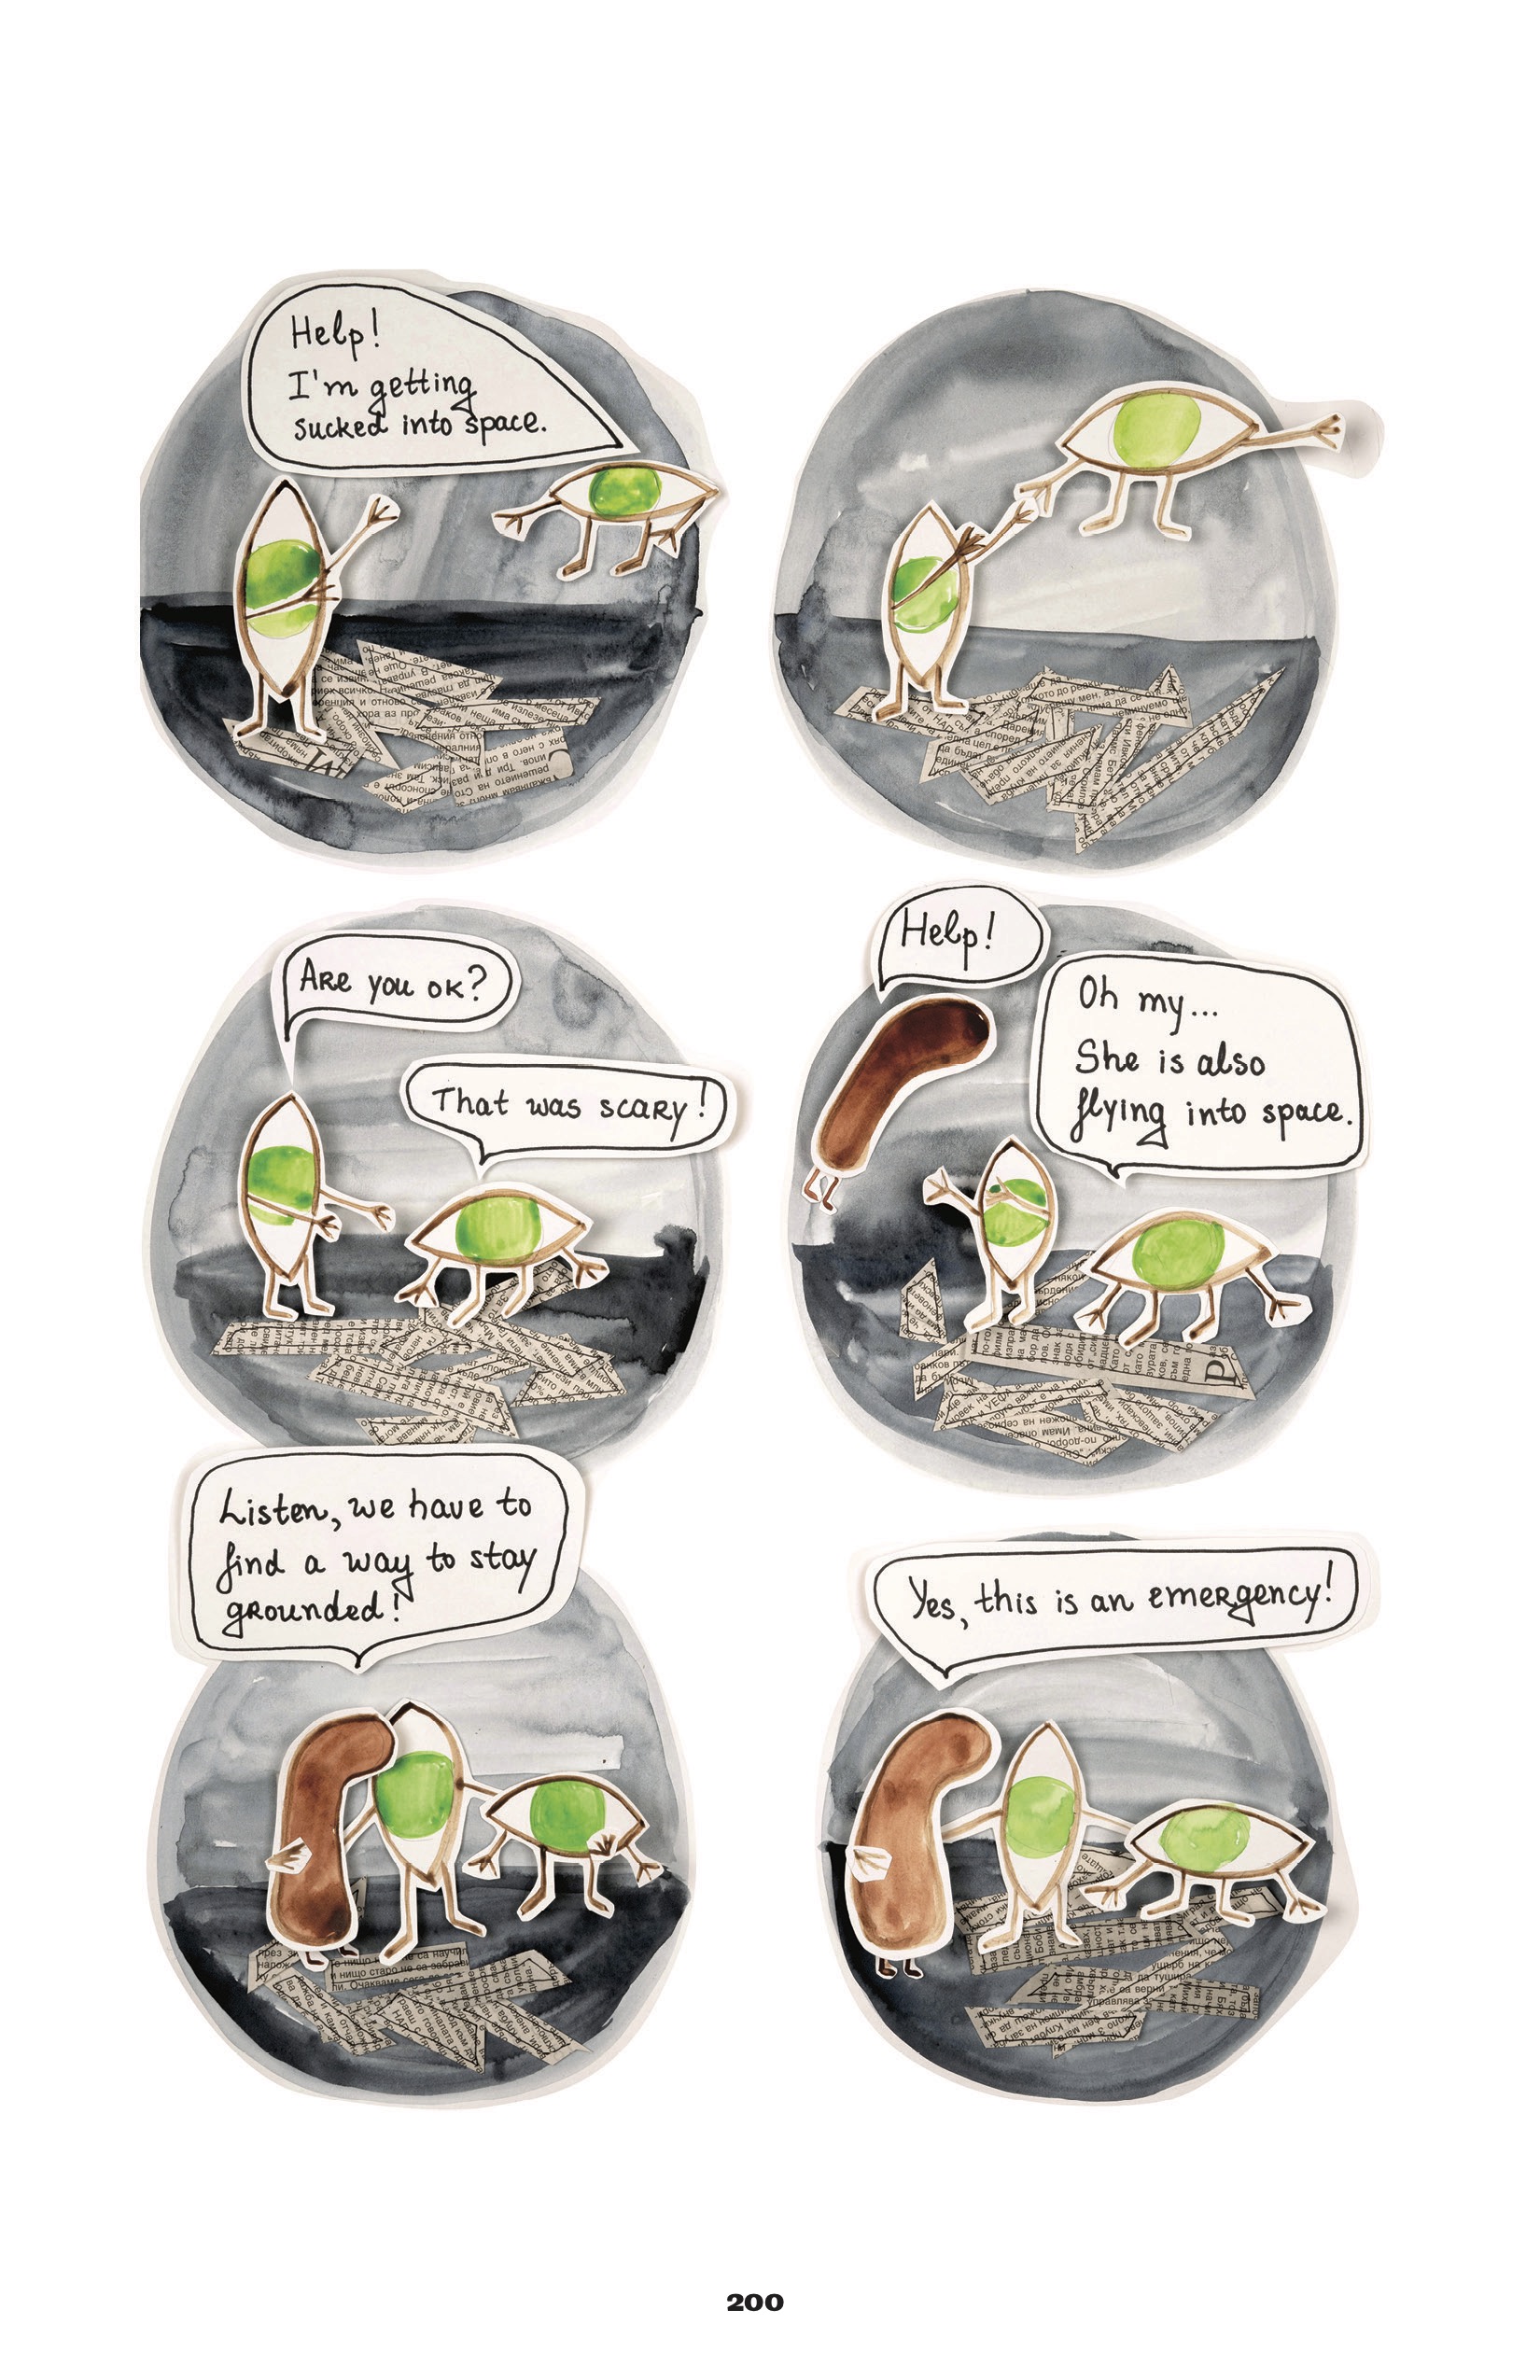 Each panel of this page is circular, and each of its components is cut and pasted in different layers, colored with marker.

1. Over a gray background, two alien-like figures, shaped like eyeballs with green irises, no pupils, and stick-figure arms and legs; one is oriented vertically, the other horizontally. The ground is collaged with thin strips of newspaper, like a pile of sticks. The wide eye is floating away and calls out, â€œHelp! Iâ€™m getting sucked into space.â€ They both reach their arms out to each other. 
2. They close the gap between them, holding hands.
3. The wide eye is back on the ground. The tall eye says, â€œAre you ok?â€ The wide replies, â€œThat was scary!â€
4. A loosely peanut-shaped figure appears from the left, floating and yelling, â€œHelp!â€ The wide eye says, â€œOh myâ€¦She is also flying into space.â€
5. The tall eye brings the peanut down to the ground and wraps their arms around both of the othersâ€™ â€˜backs.â€™ They say, â€œListen, we have to find a way to stay grounded!â€
6. All the figures are in the same position, but slightly pulled apart so they can look at each other better. The peanut says, â€œYes, this is an emergency!â€